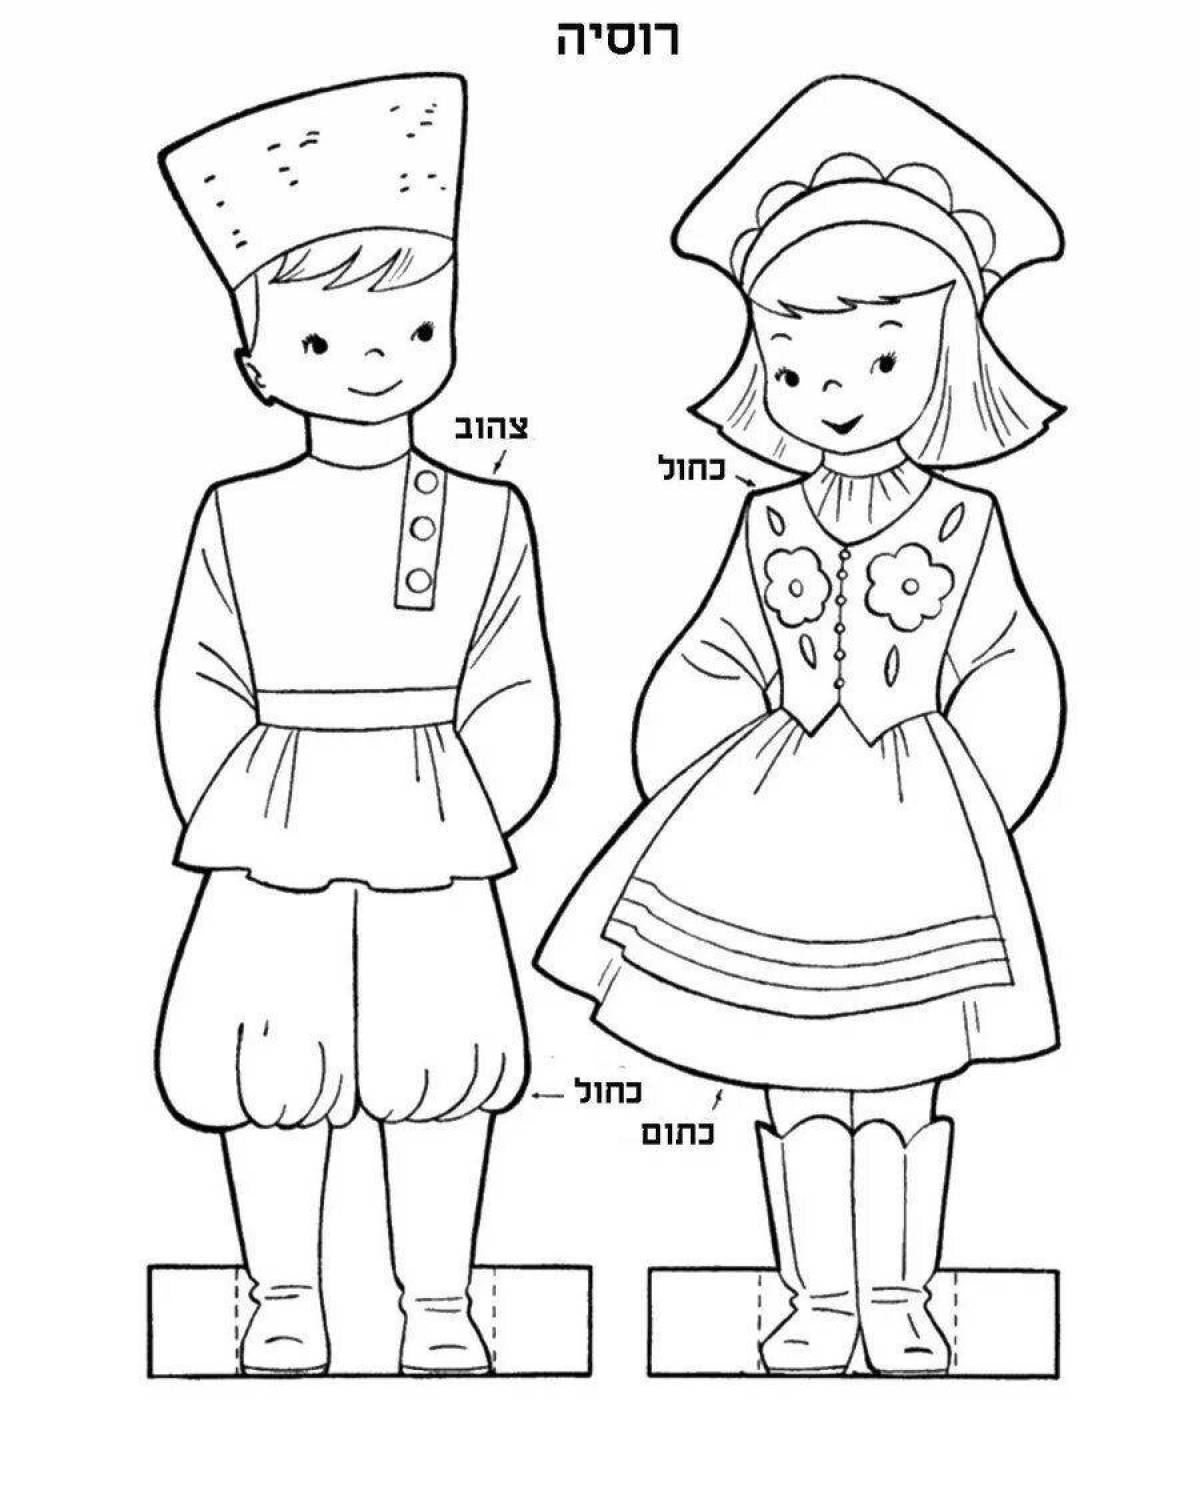 Coloring page glorious Cossack costume